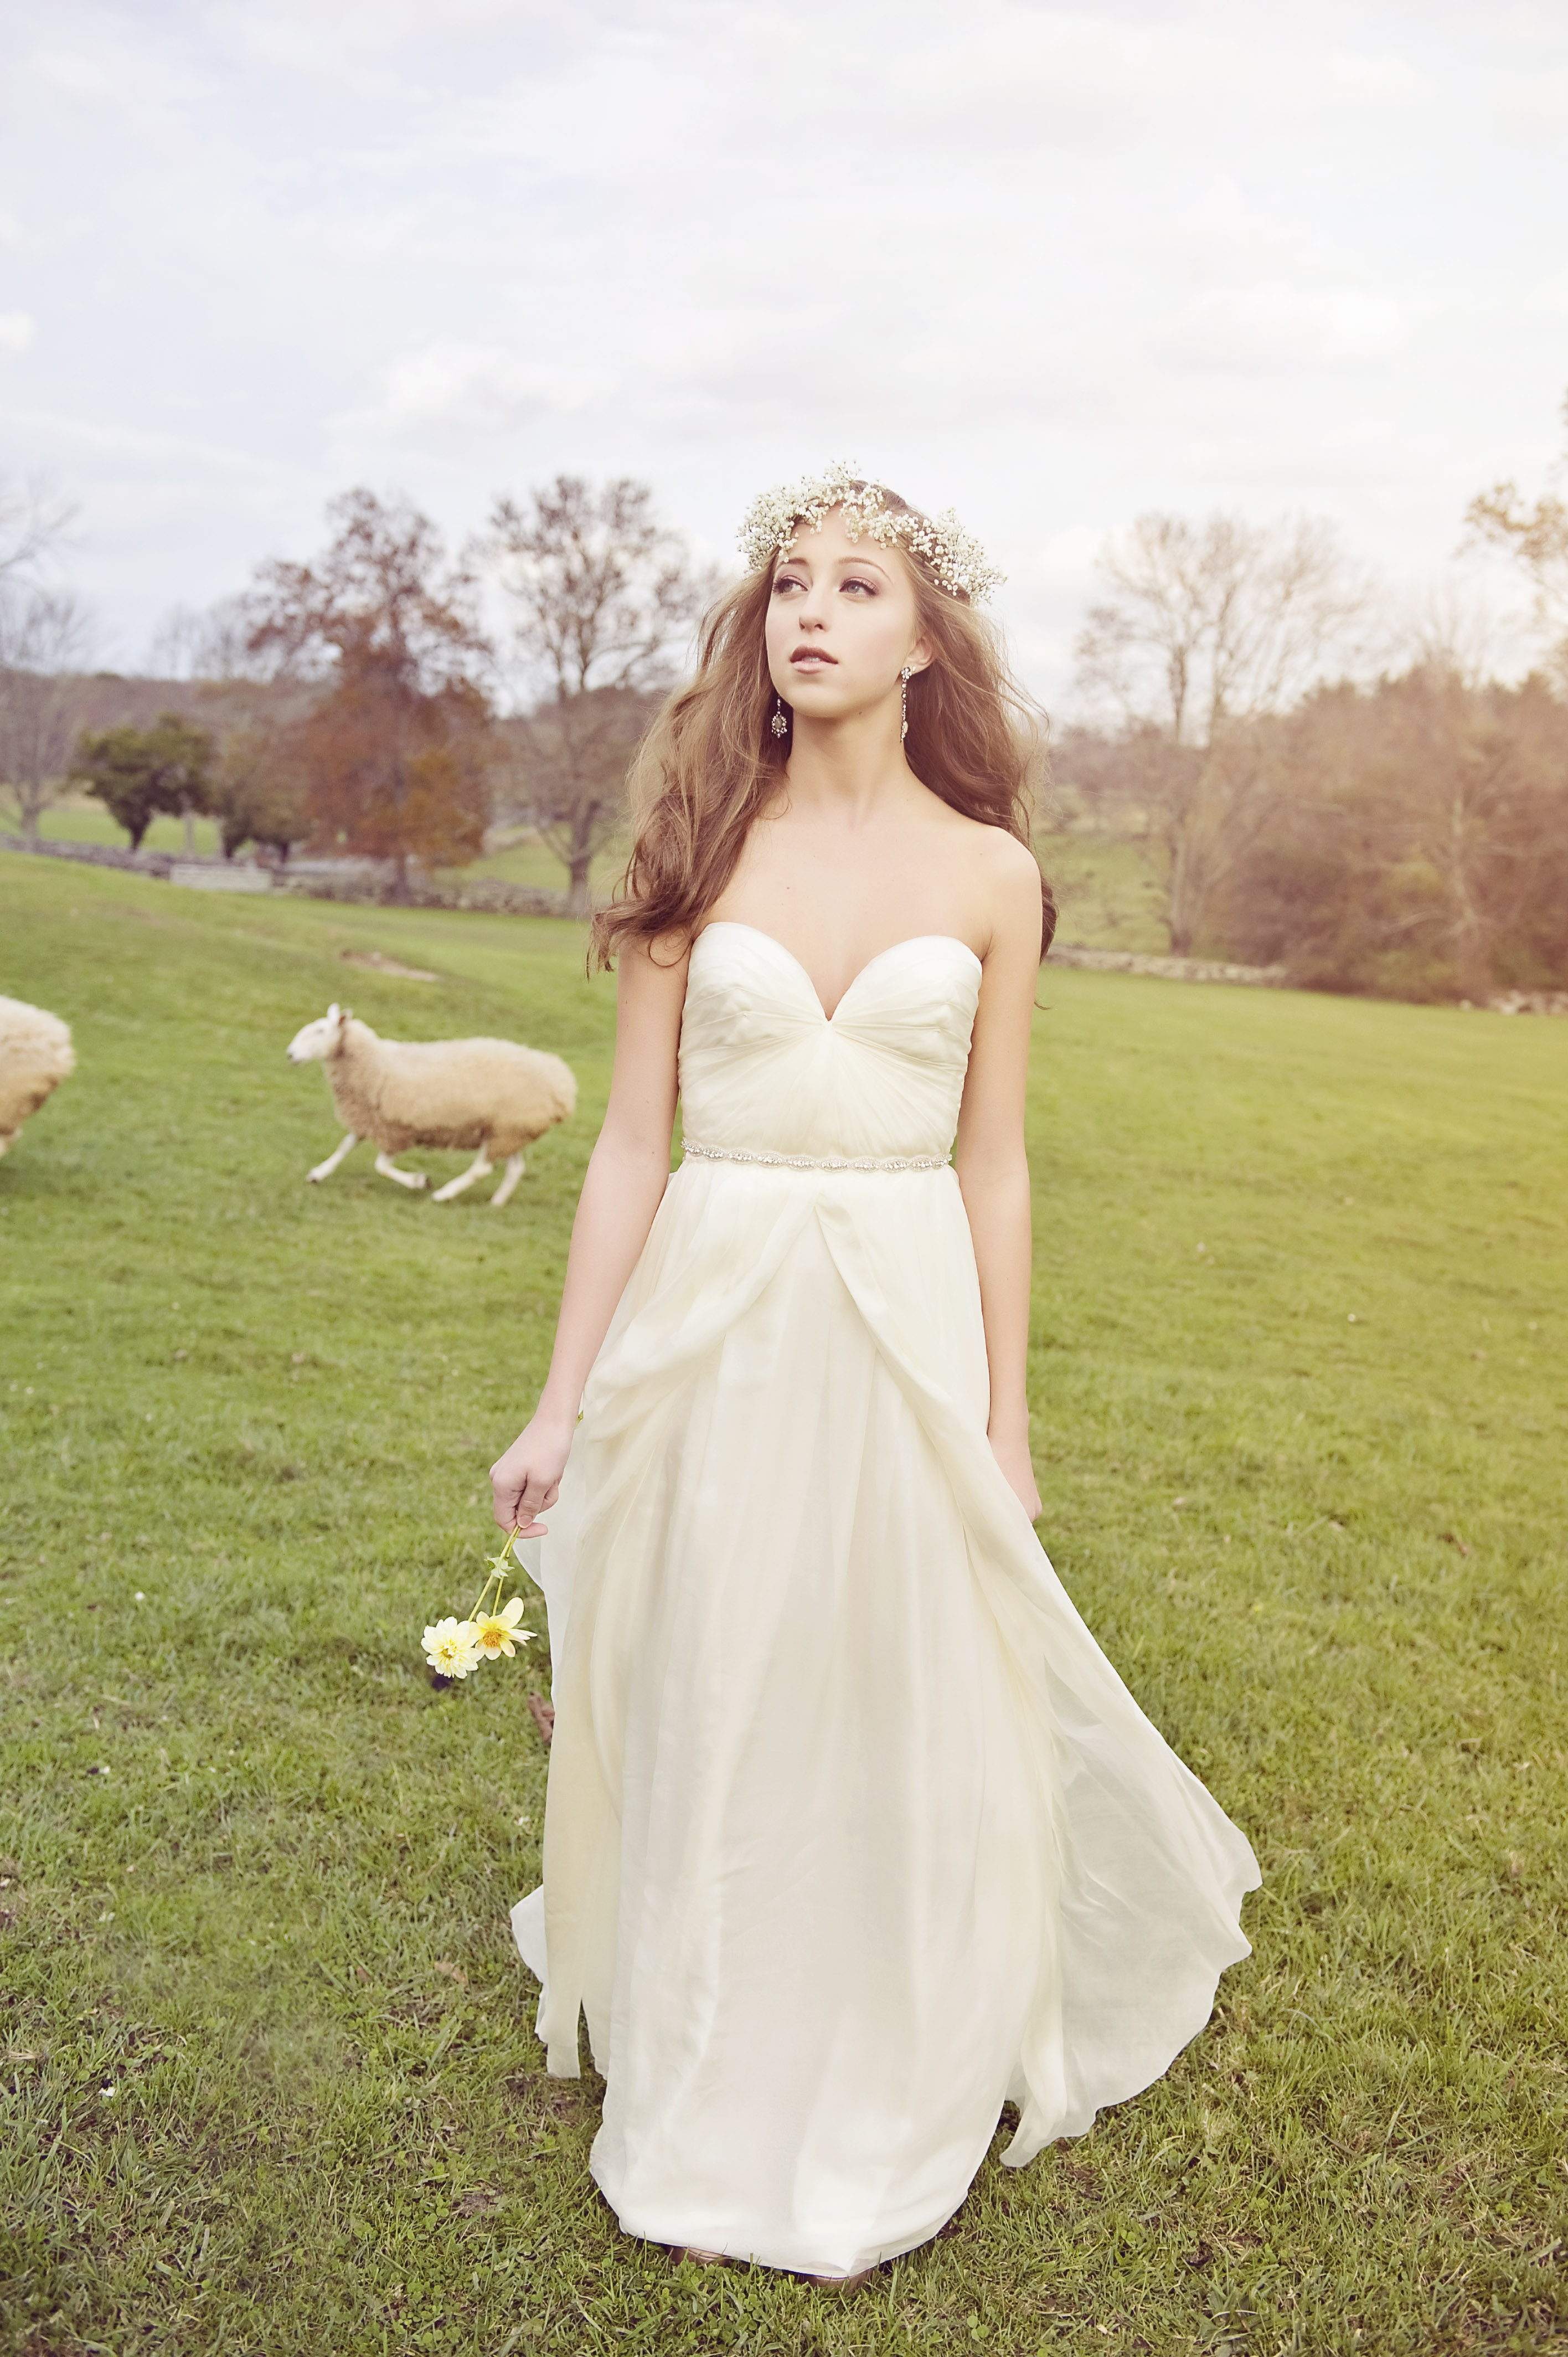 Great Rustic Barn Wedding Dresses of the decade Check it out now 